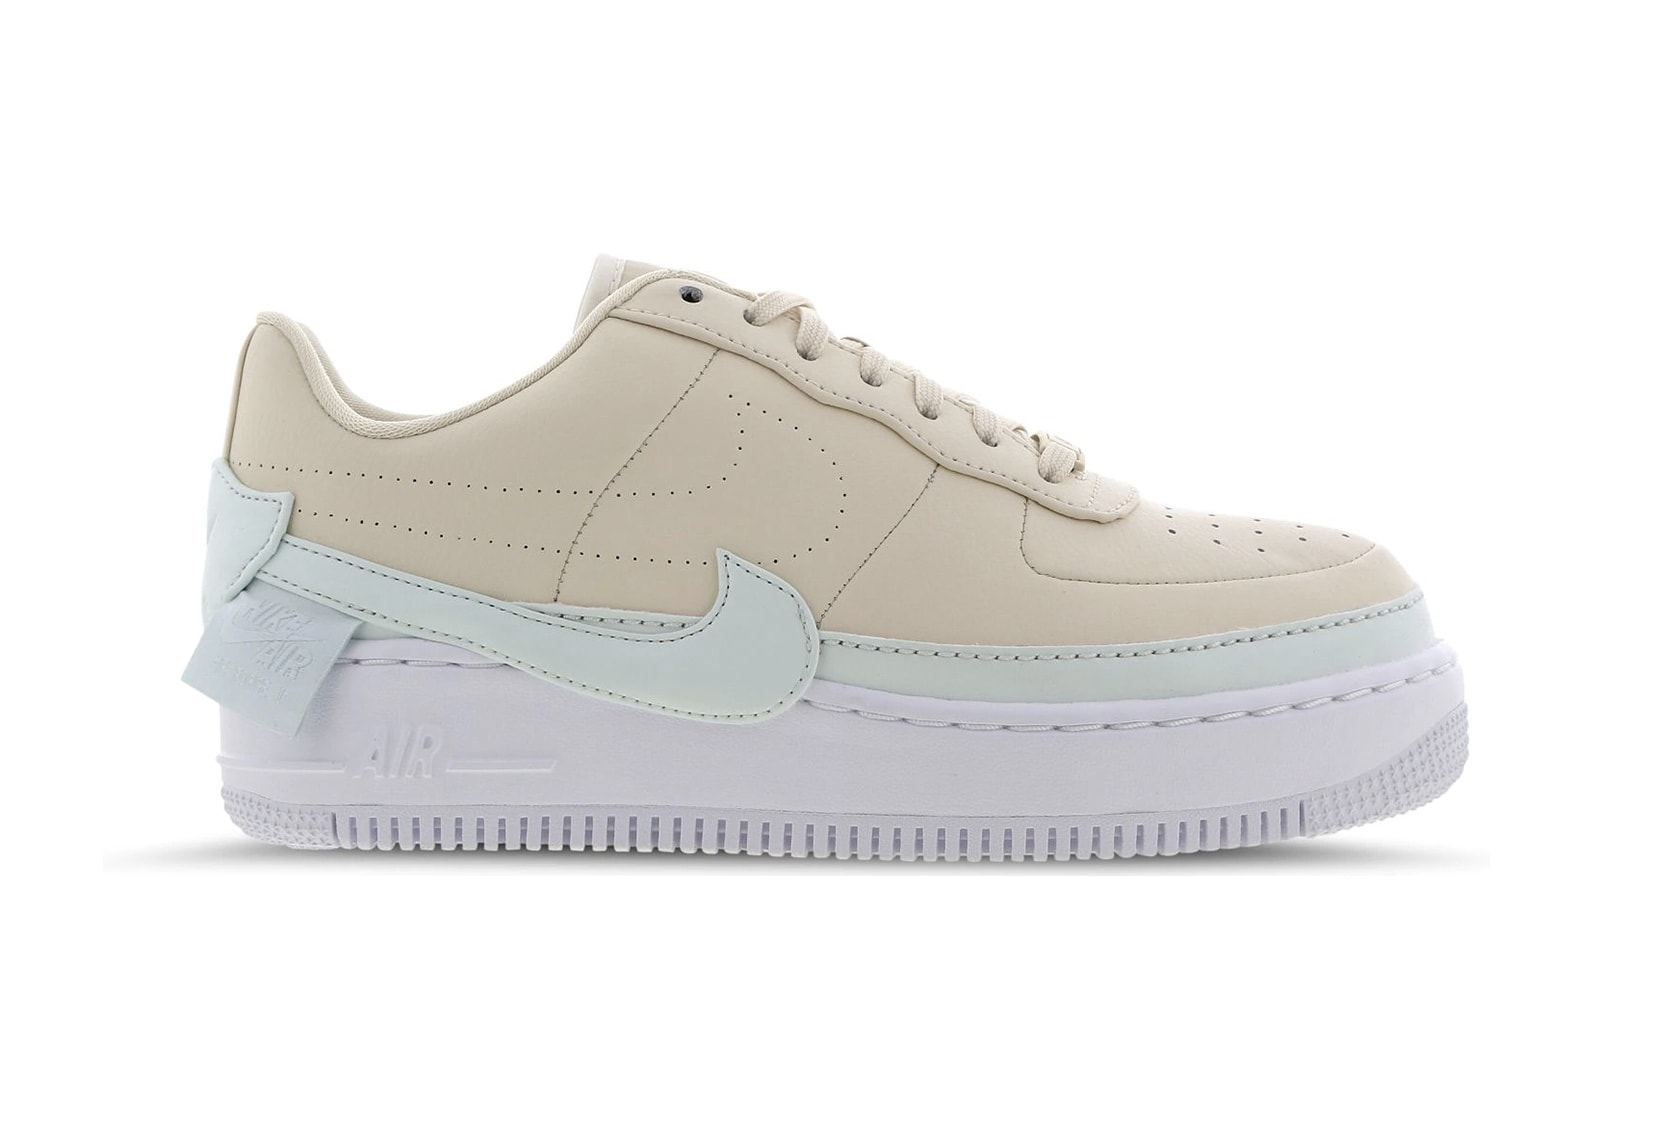 Nike Air Force 1 Jester XX Cream Mint Green Tan Brown Pastel Pink Women's Sneakers Trainers